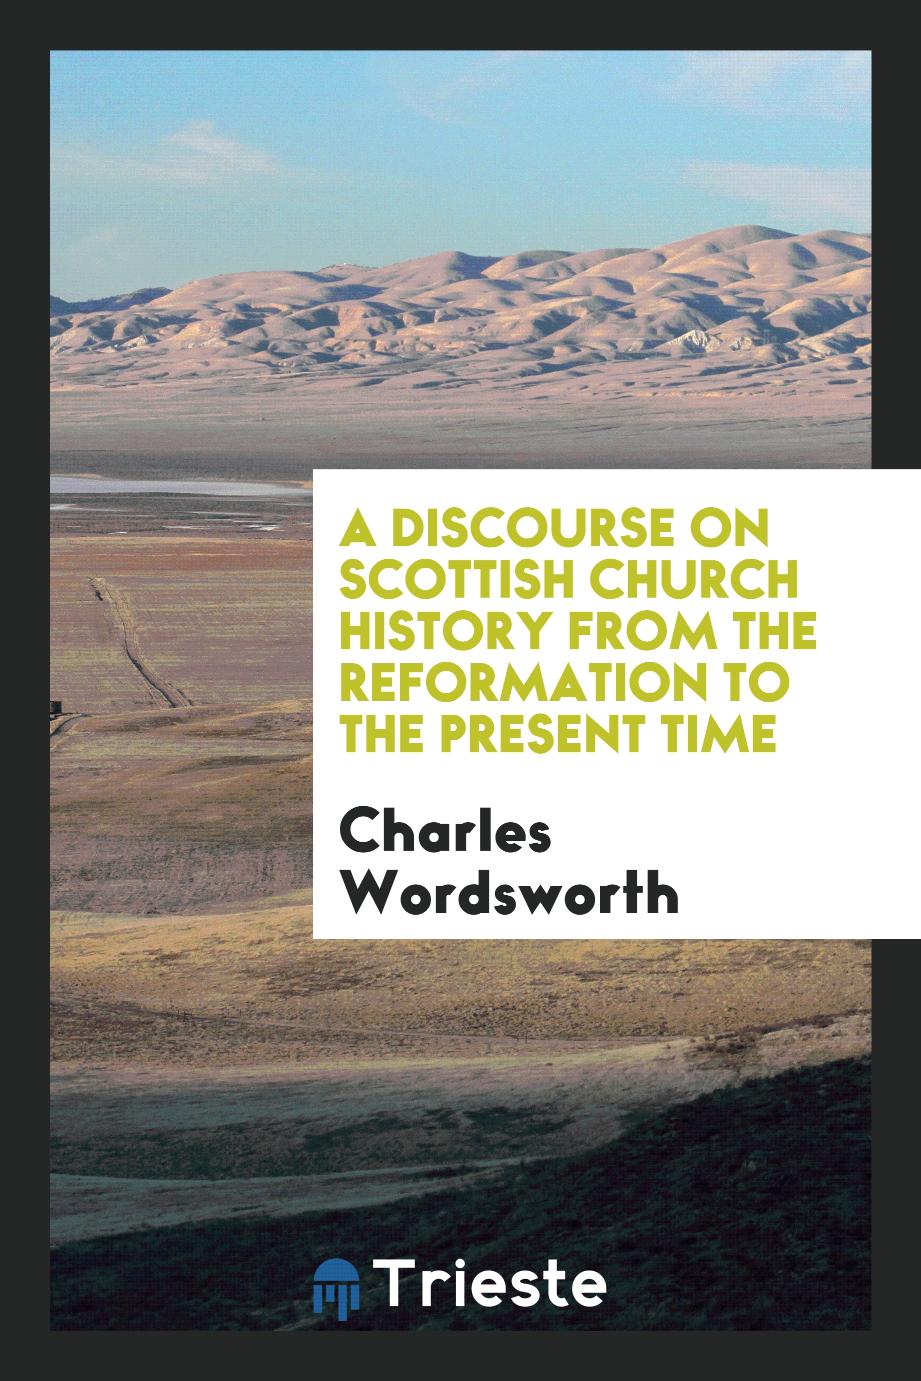 A Discourse on Scottish Church History from the Reformation to the Present Time